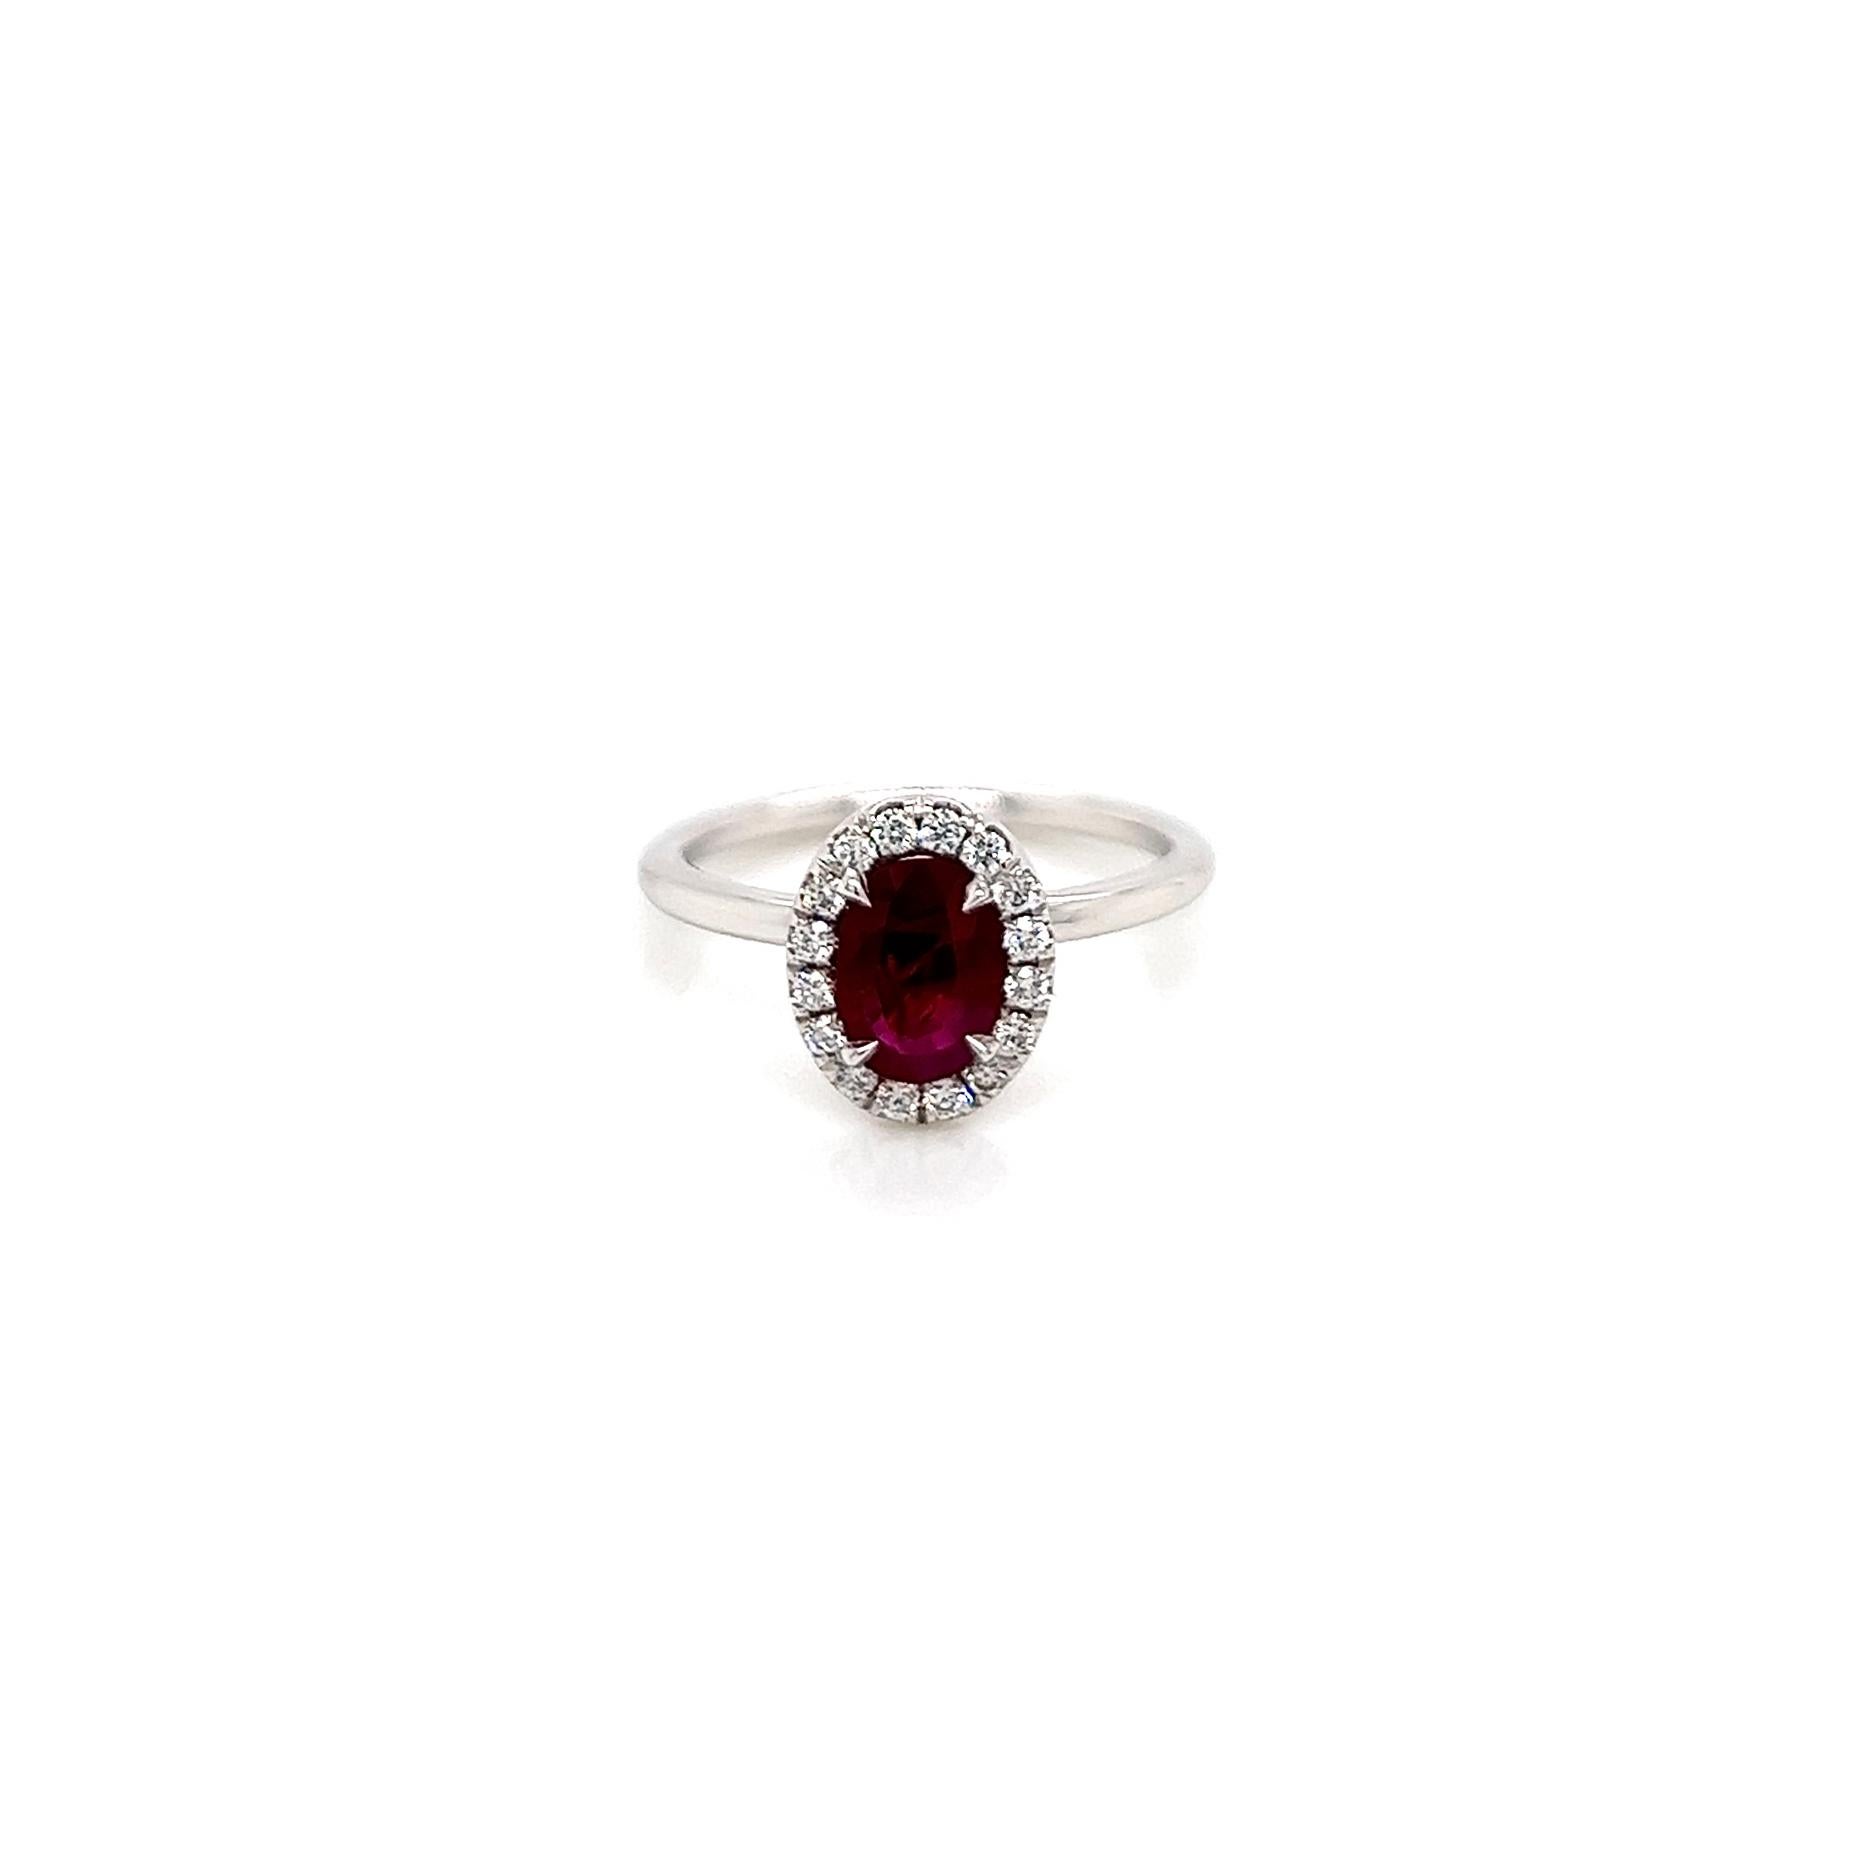 0.80Carat Ruby and Diamond Ladies Ring

-Metal Type: 18K White Gold
-0.80Carat Oval Cut Ruby
-0.24Carat Round Side Natural Diamonds
-Size 5.75

Made in New York City